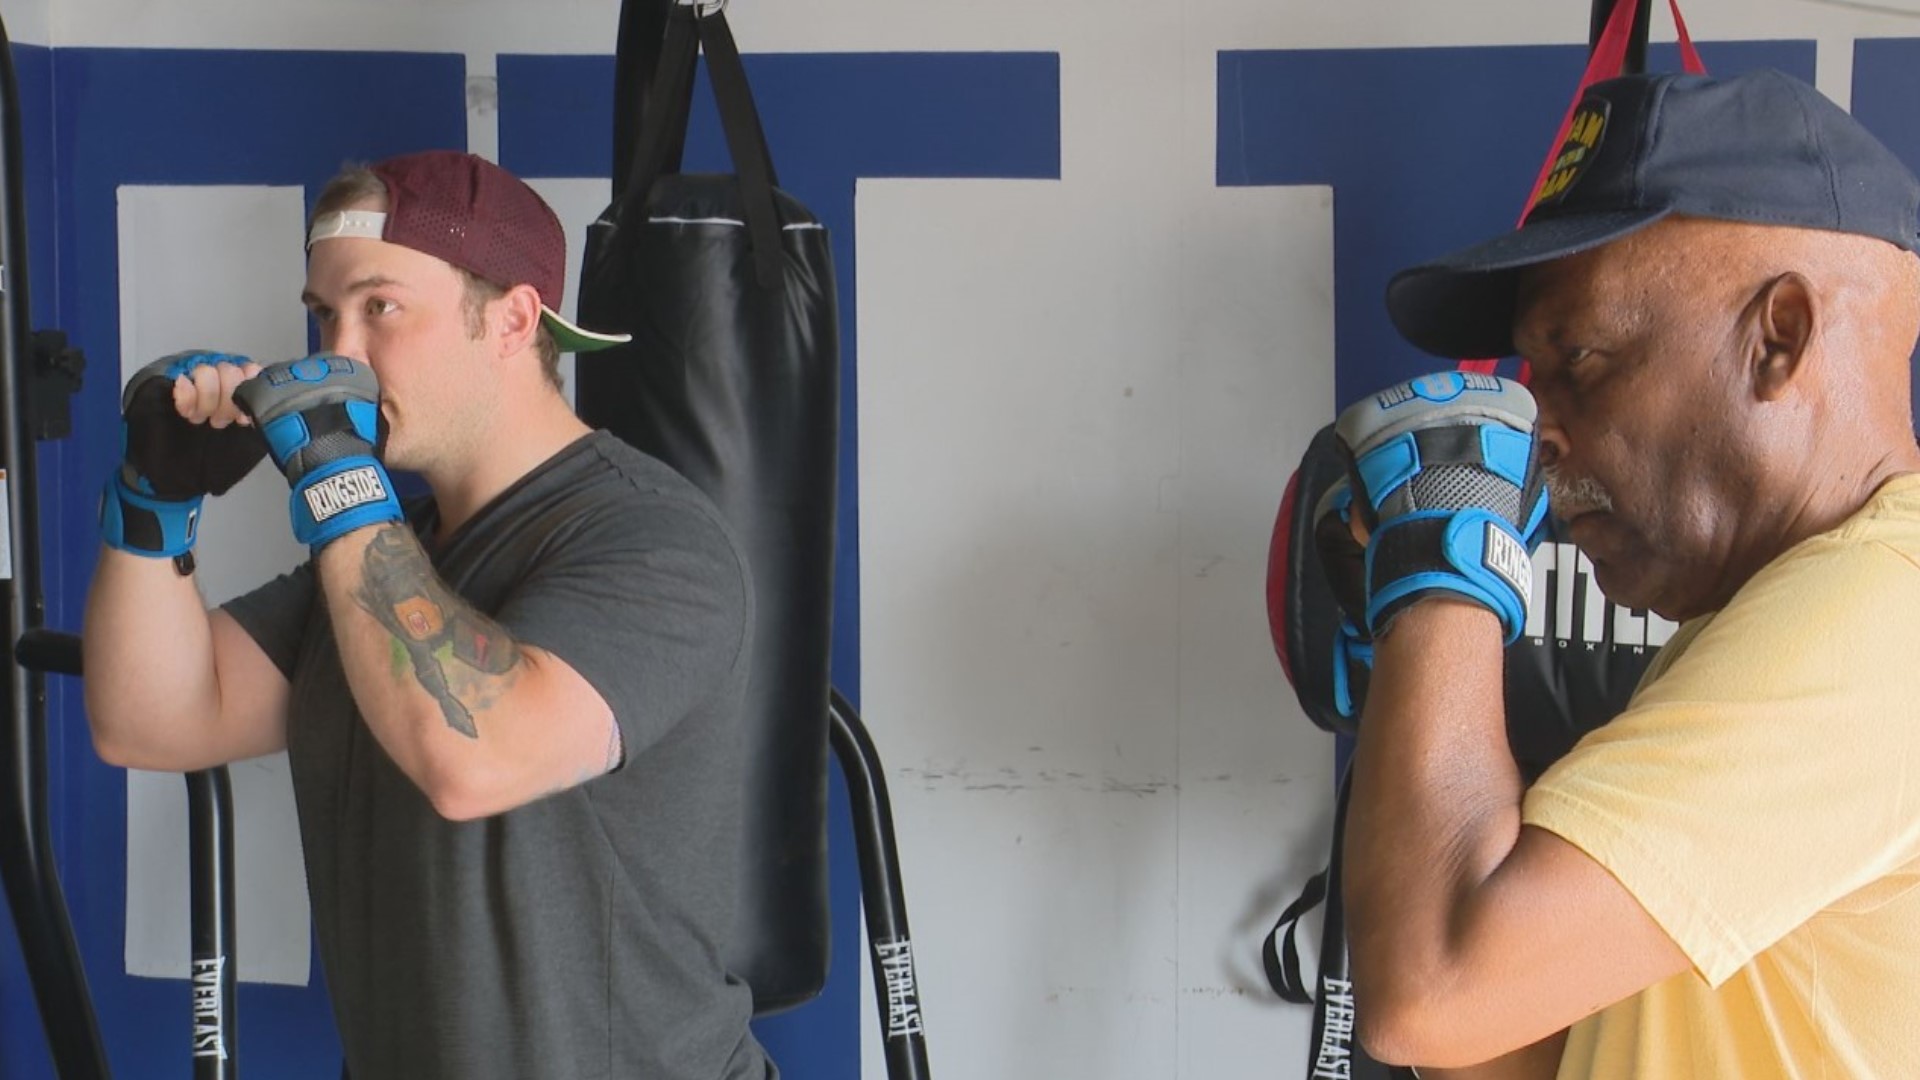 The free boxing classes give participants a chance to talk about their time in the service and be around fellow vets, while blowing off some steam.